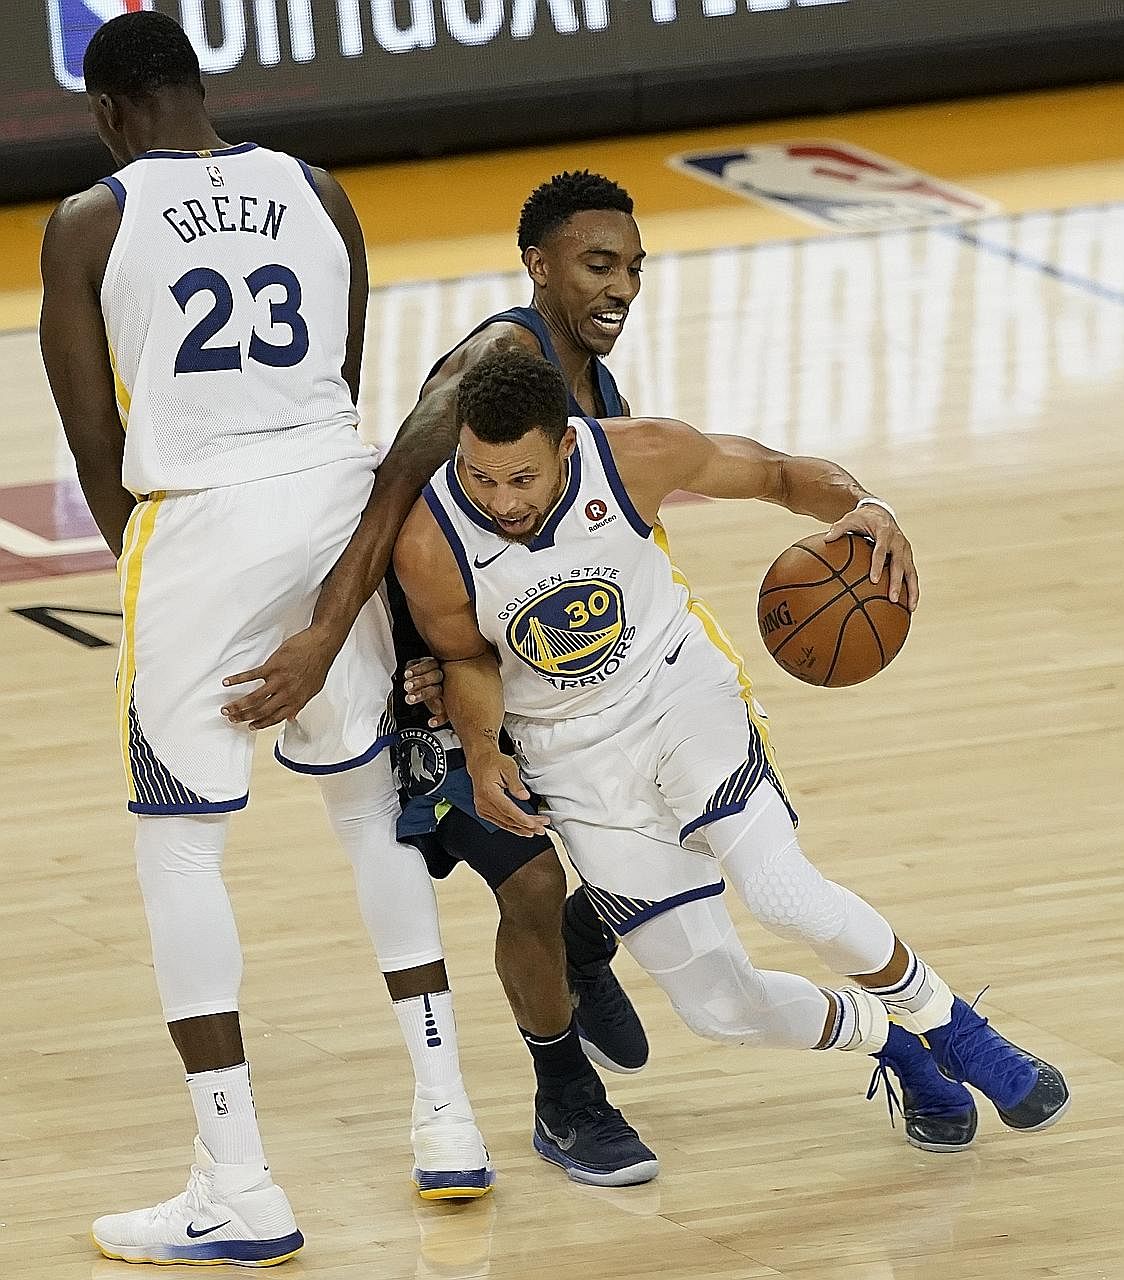 Golden State Warriors' Stephen Curry and team-mate Draymond Green executing a pick and roll to evade the defence of Minnesota Timberwolves guard Jeff Teague during their NBA game on Wednesday. Golden State won 125-101.